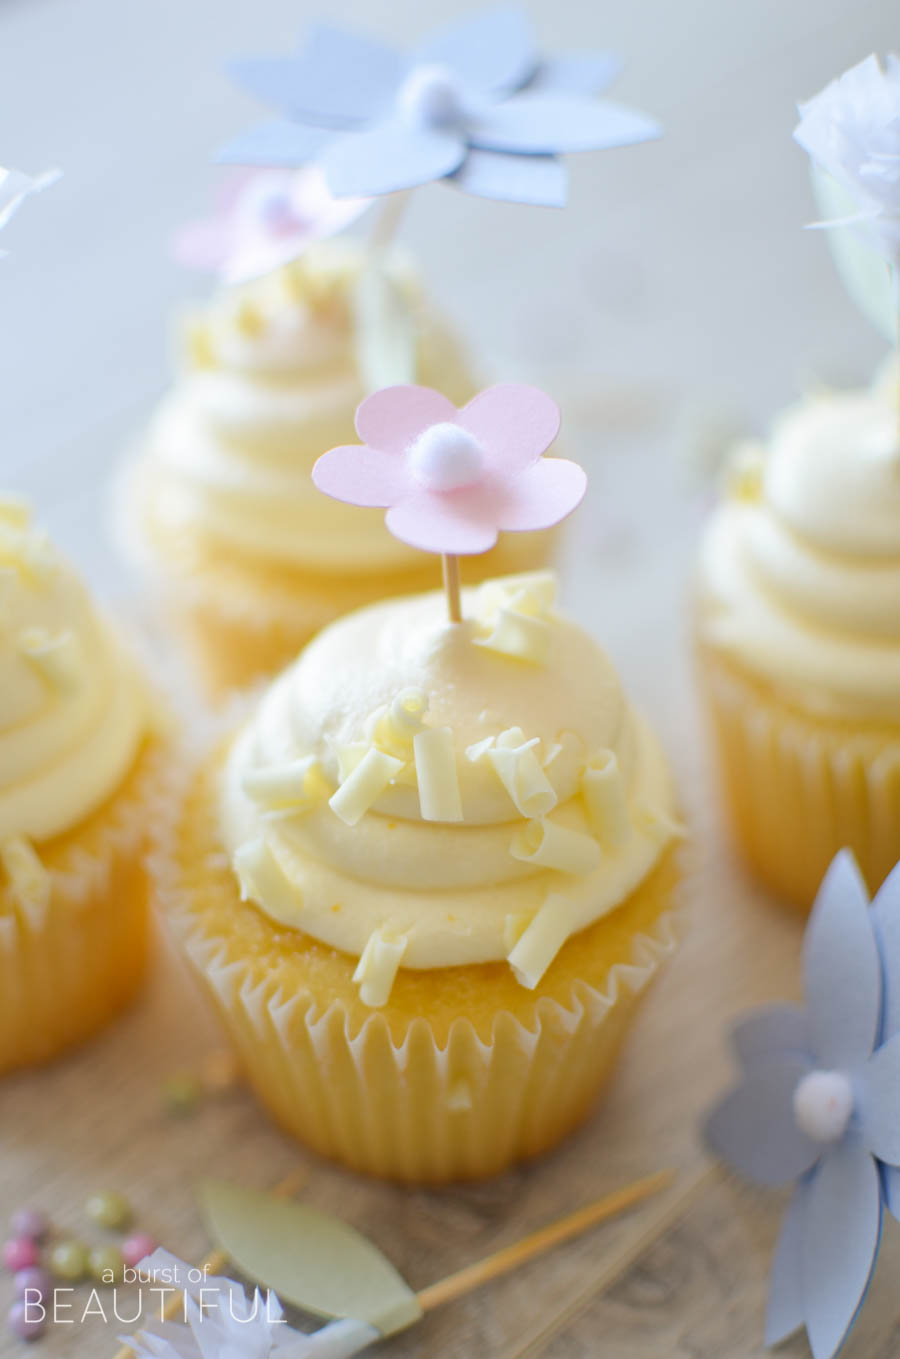 Add a whimsical touch to your next special event with these pretty DIY flower cupcake toppers | A Burst of Beautiful 